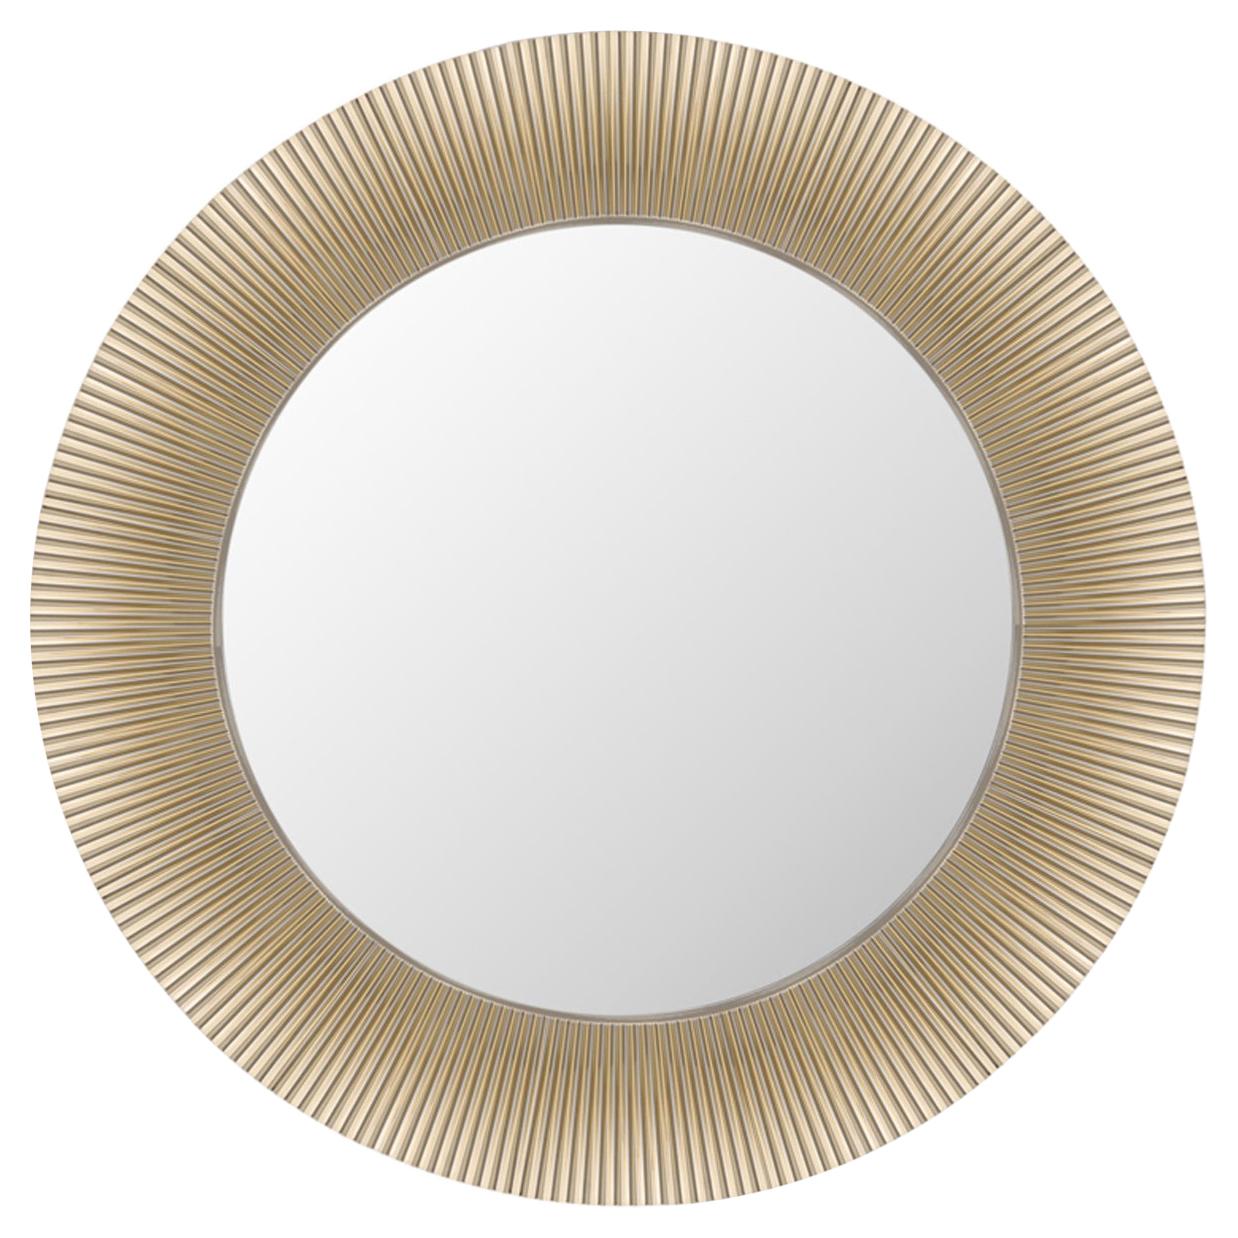 Kartell All Saints Mirror in Gold by Ludovica and Roberto Palomba